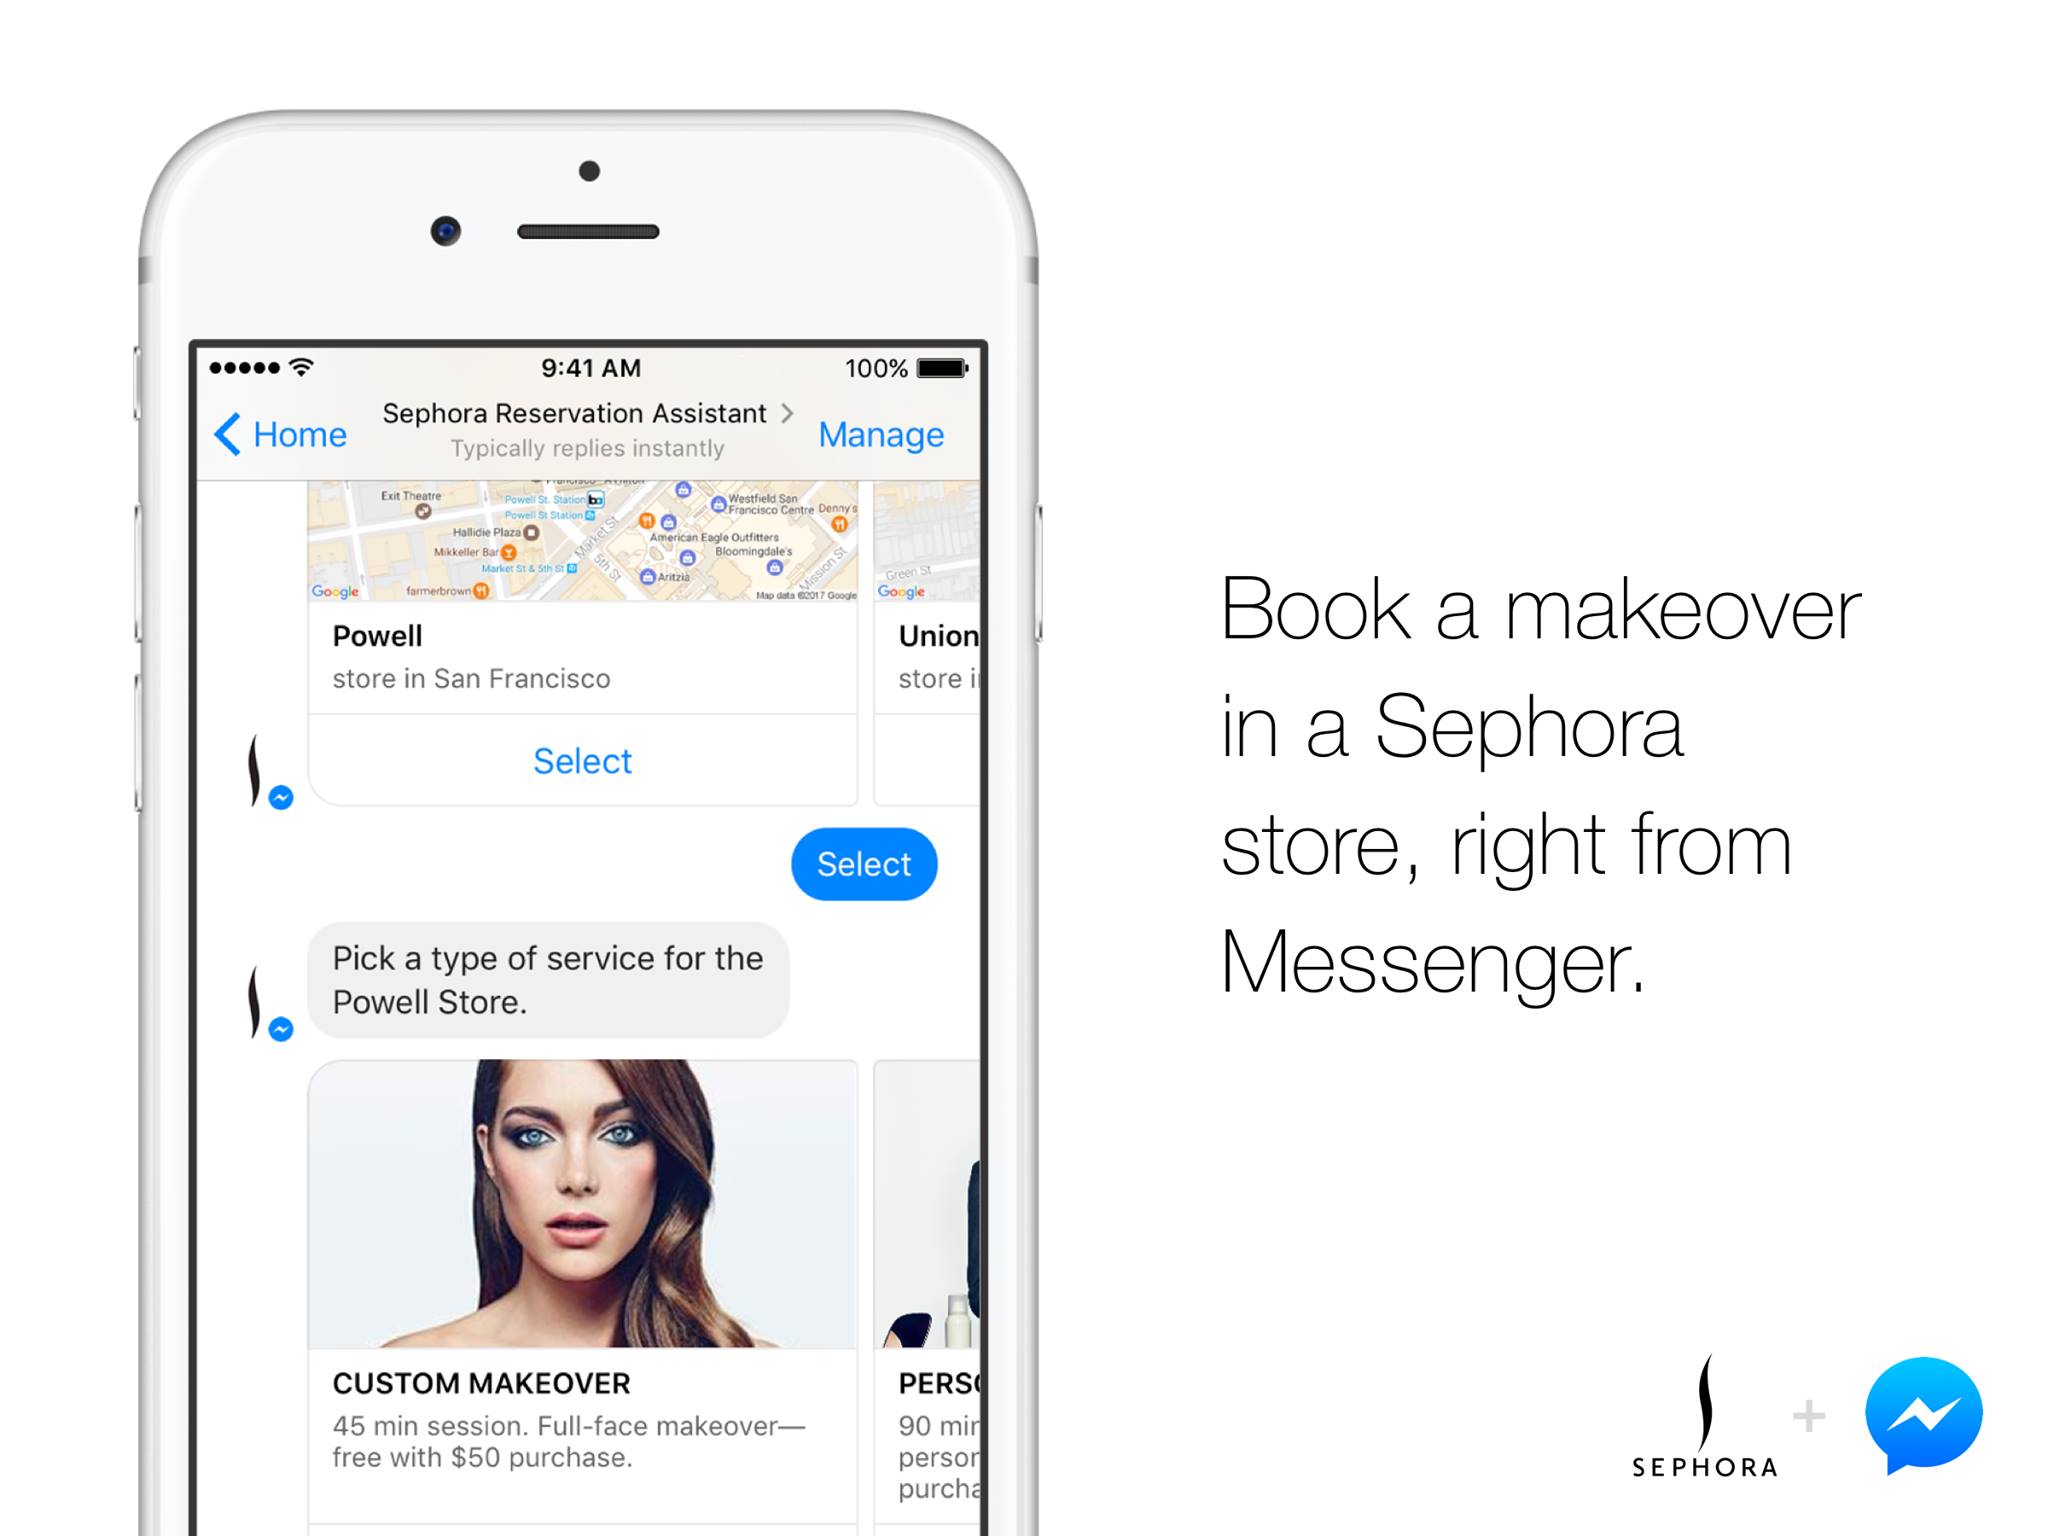 Sephora has an extremely successful Facebook Messenger bot 